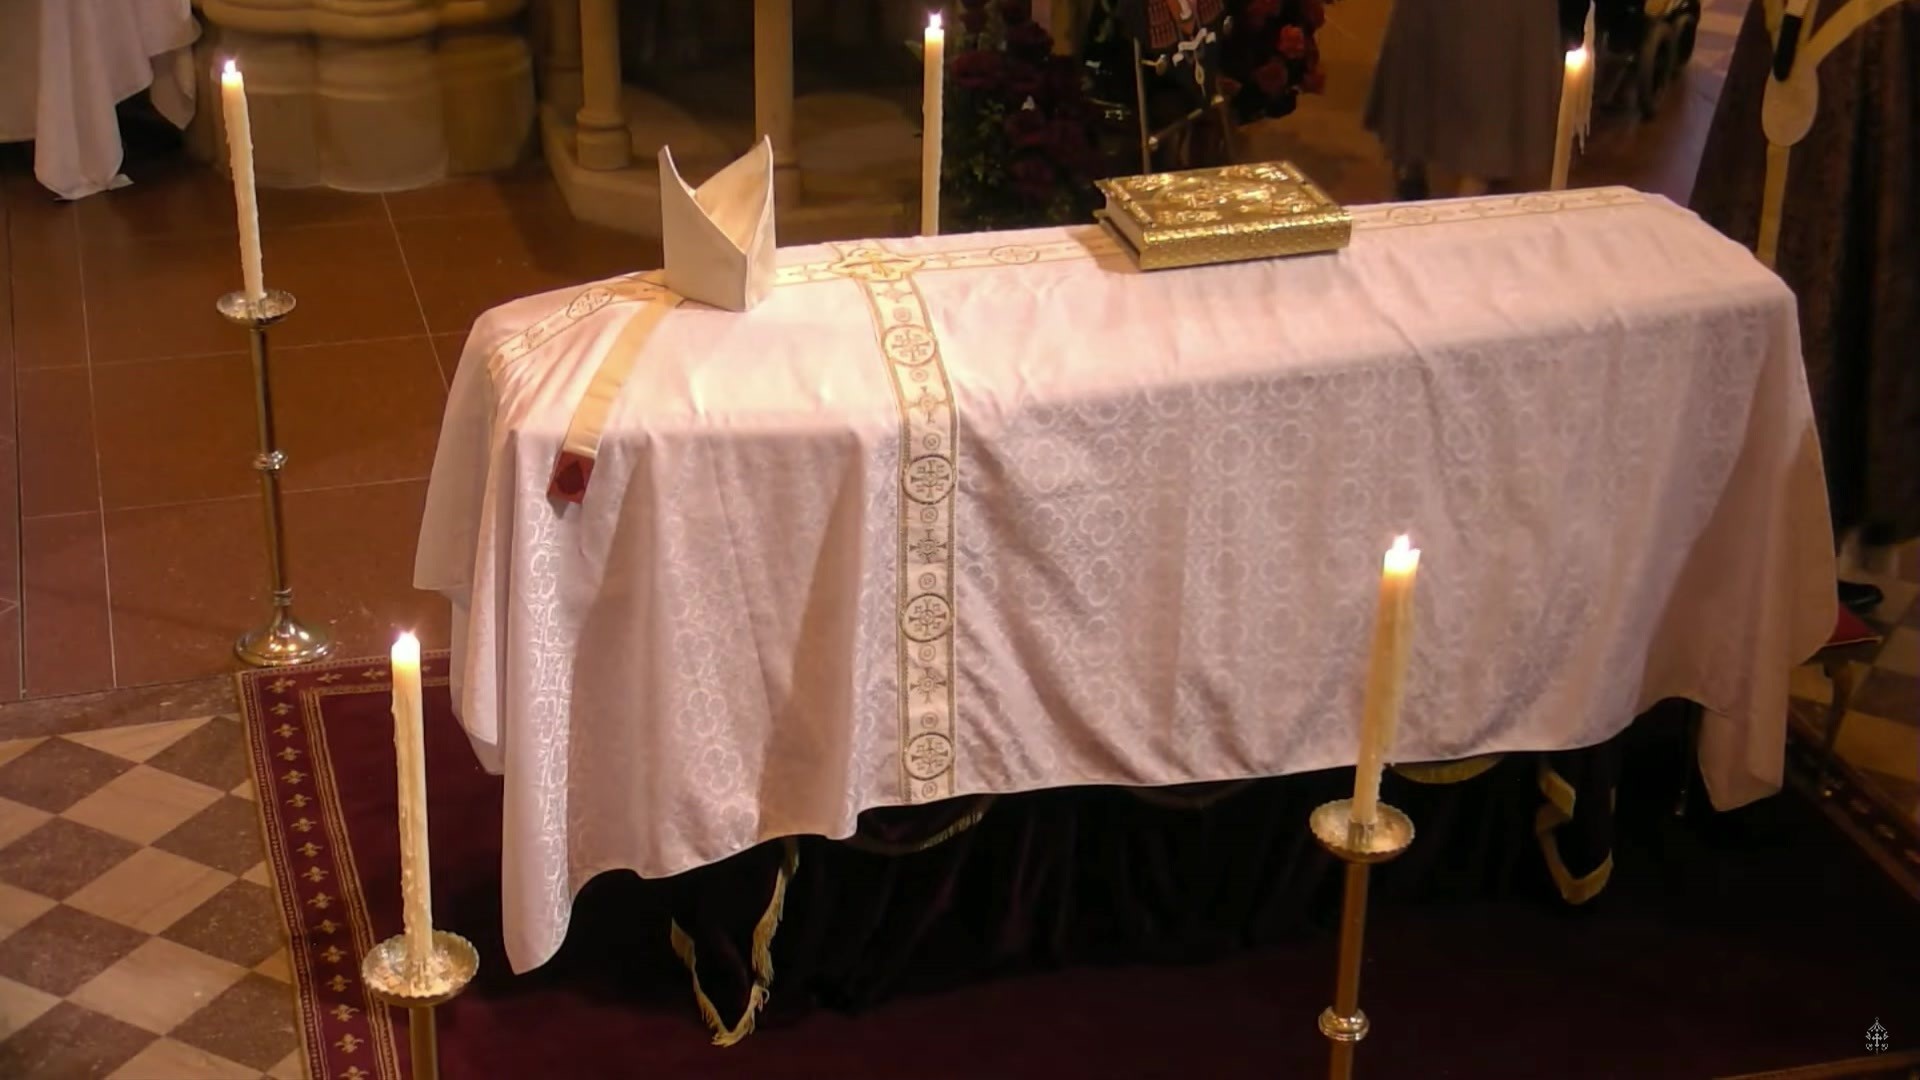 A coffin with a white blanked draped over it and a gold bible on top